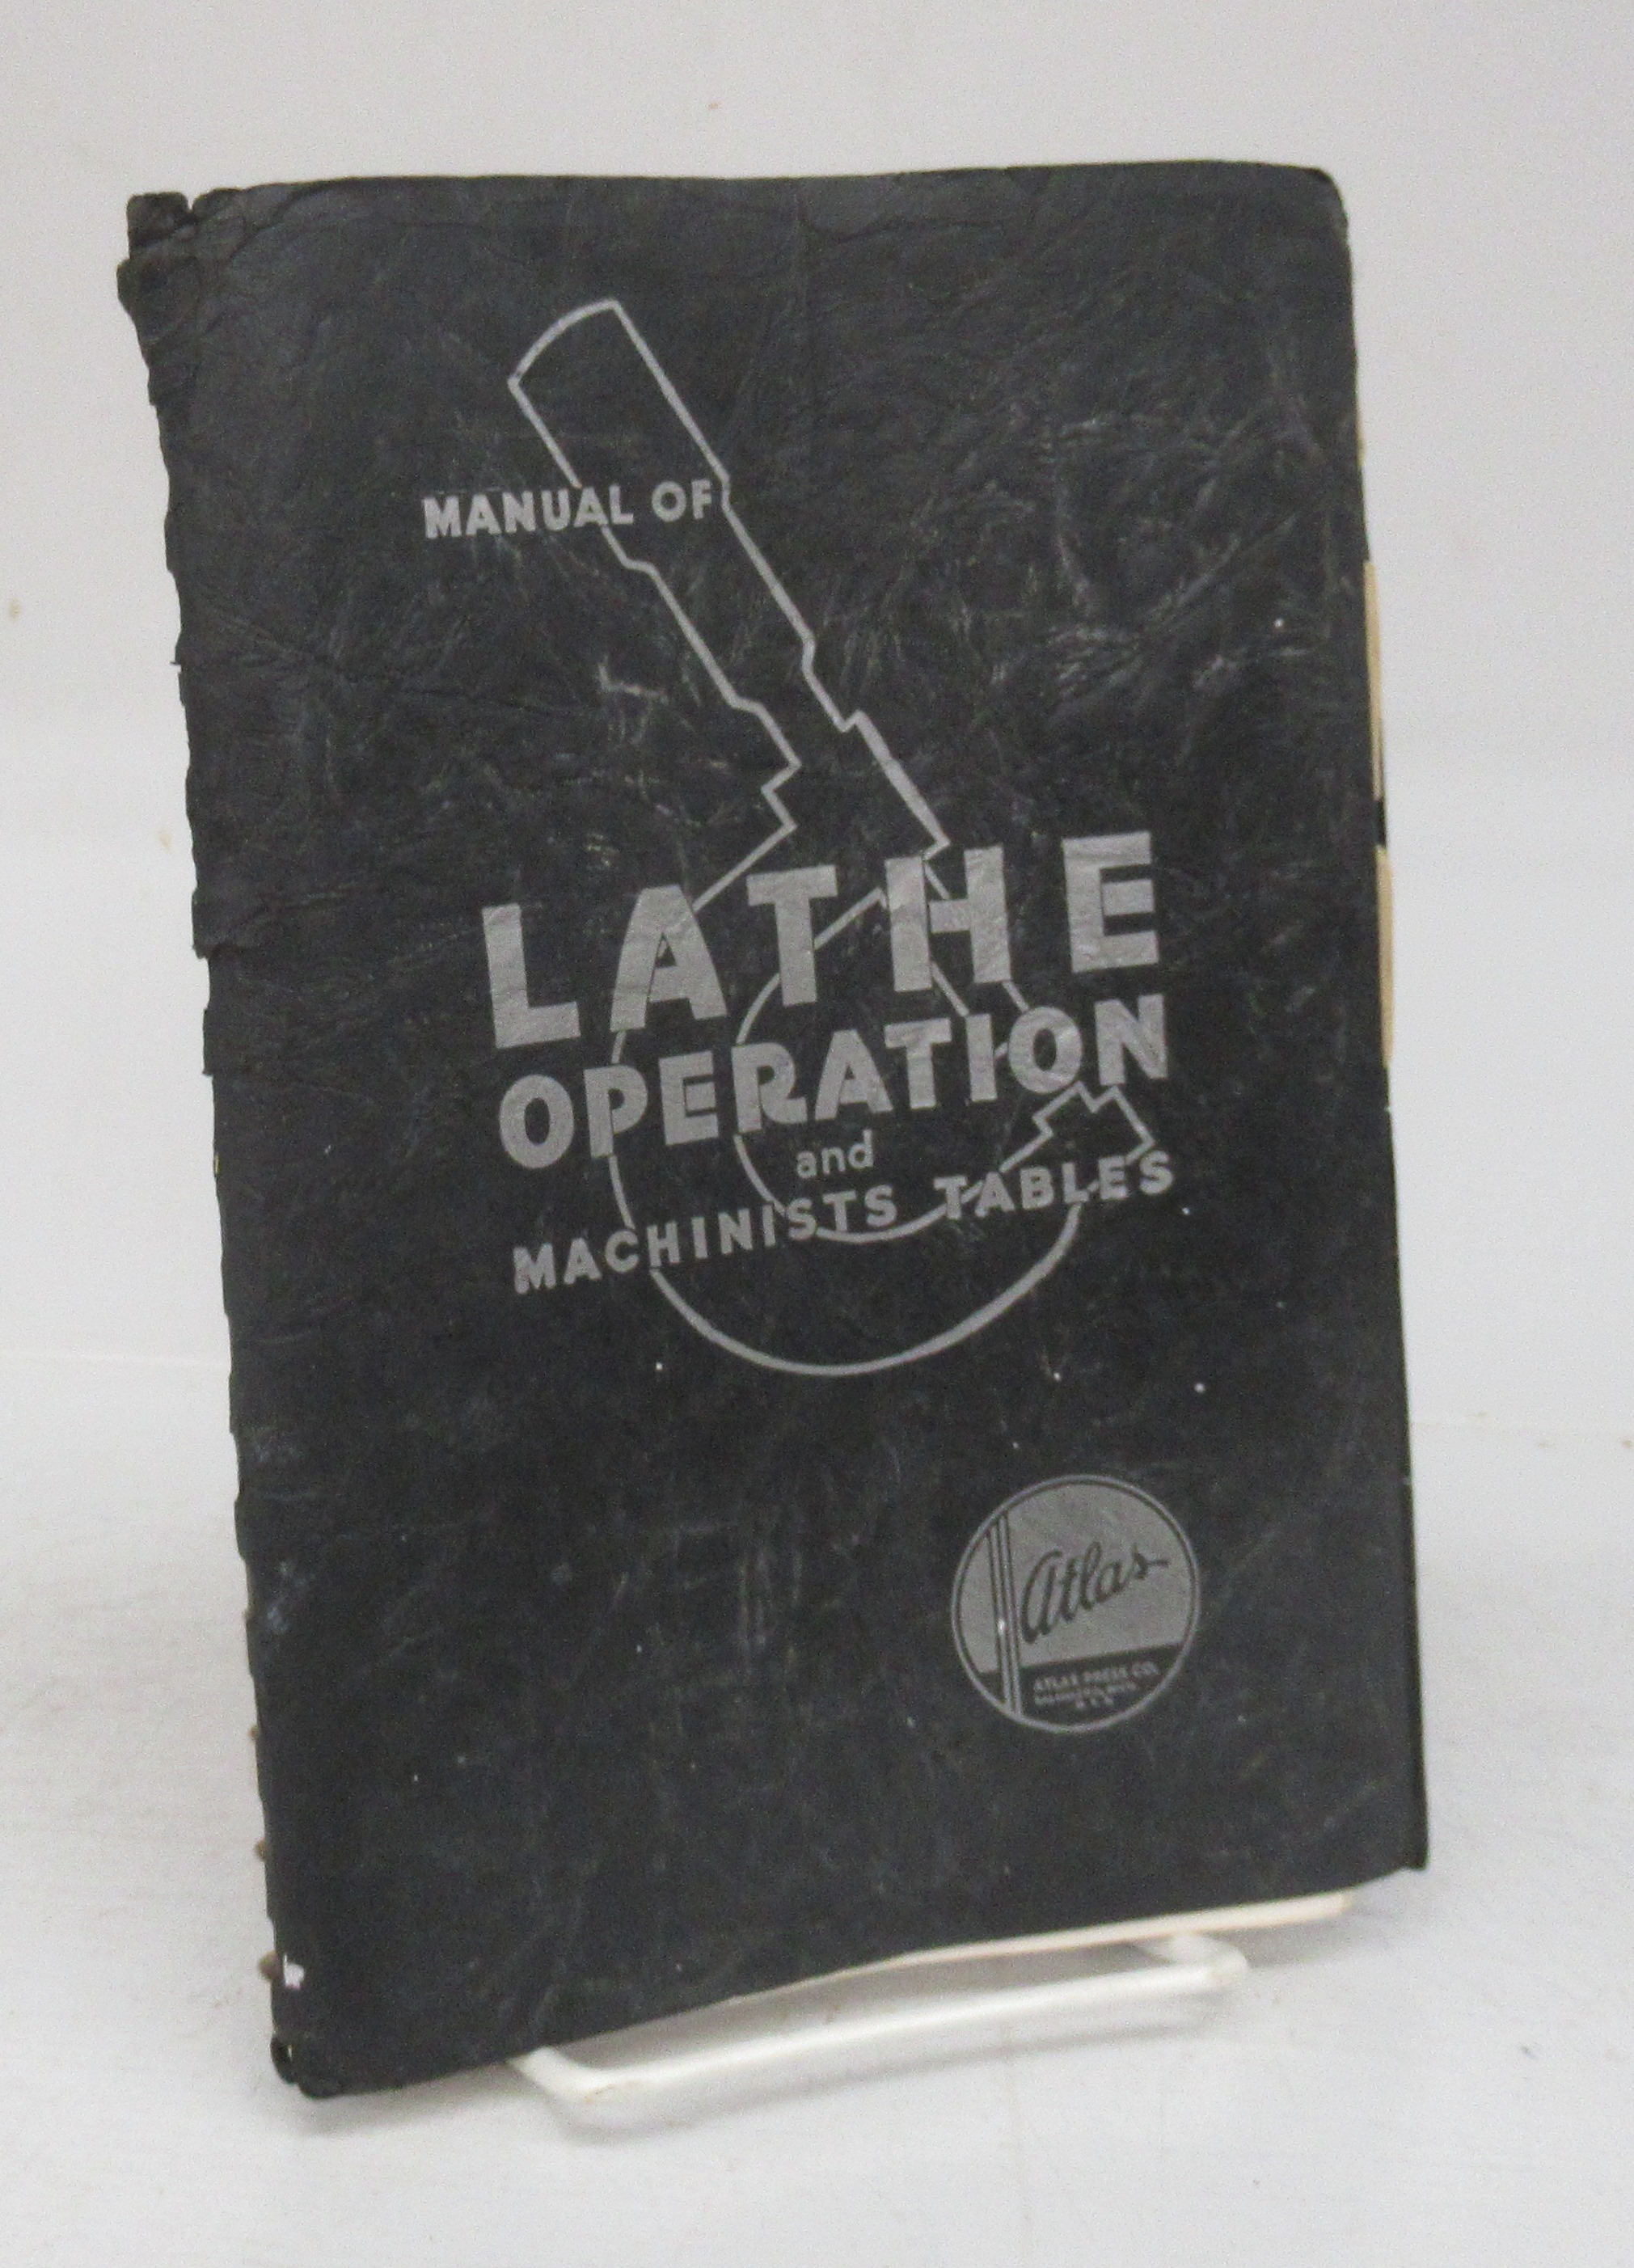 ATLAS Manual of Lathe Operation and Machinists Tables 292 Pages on CD 